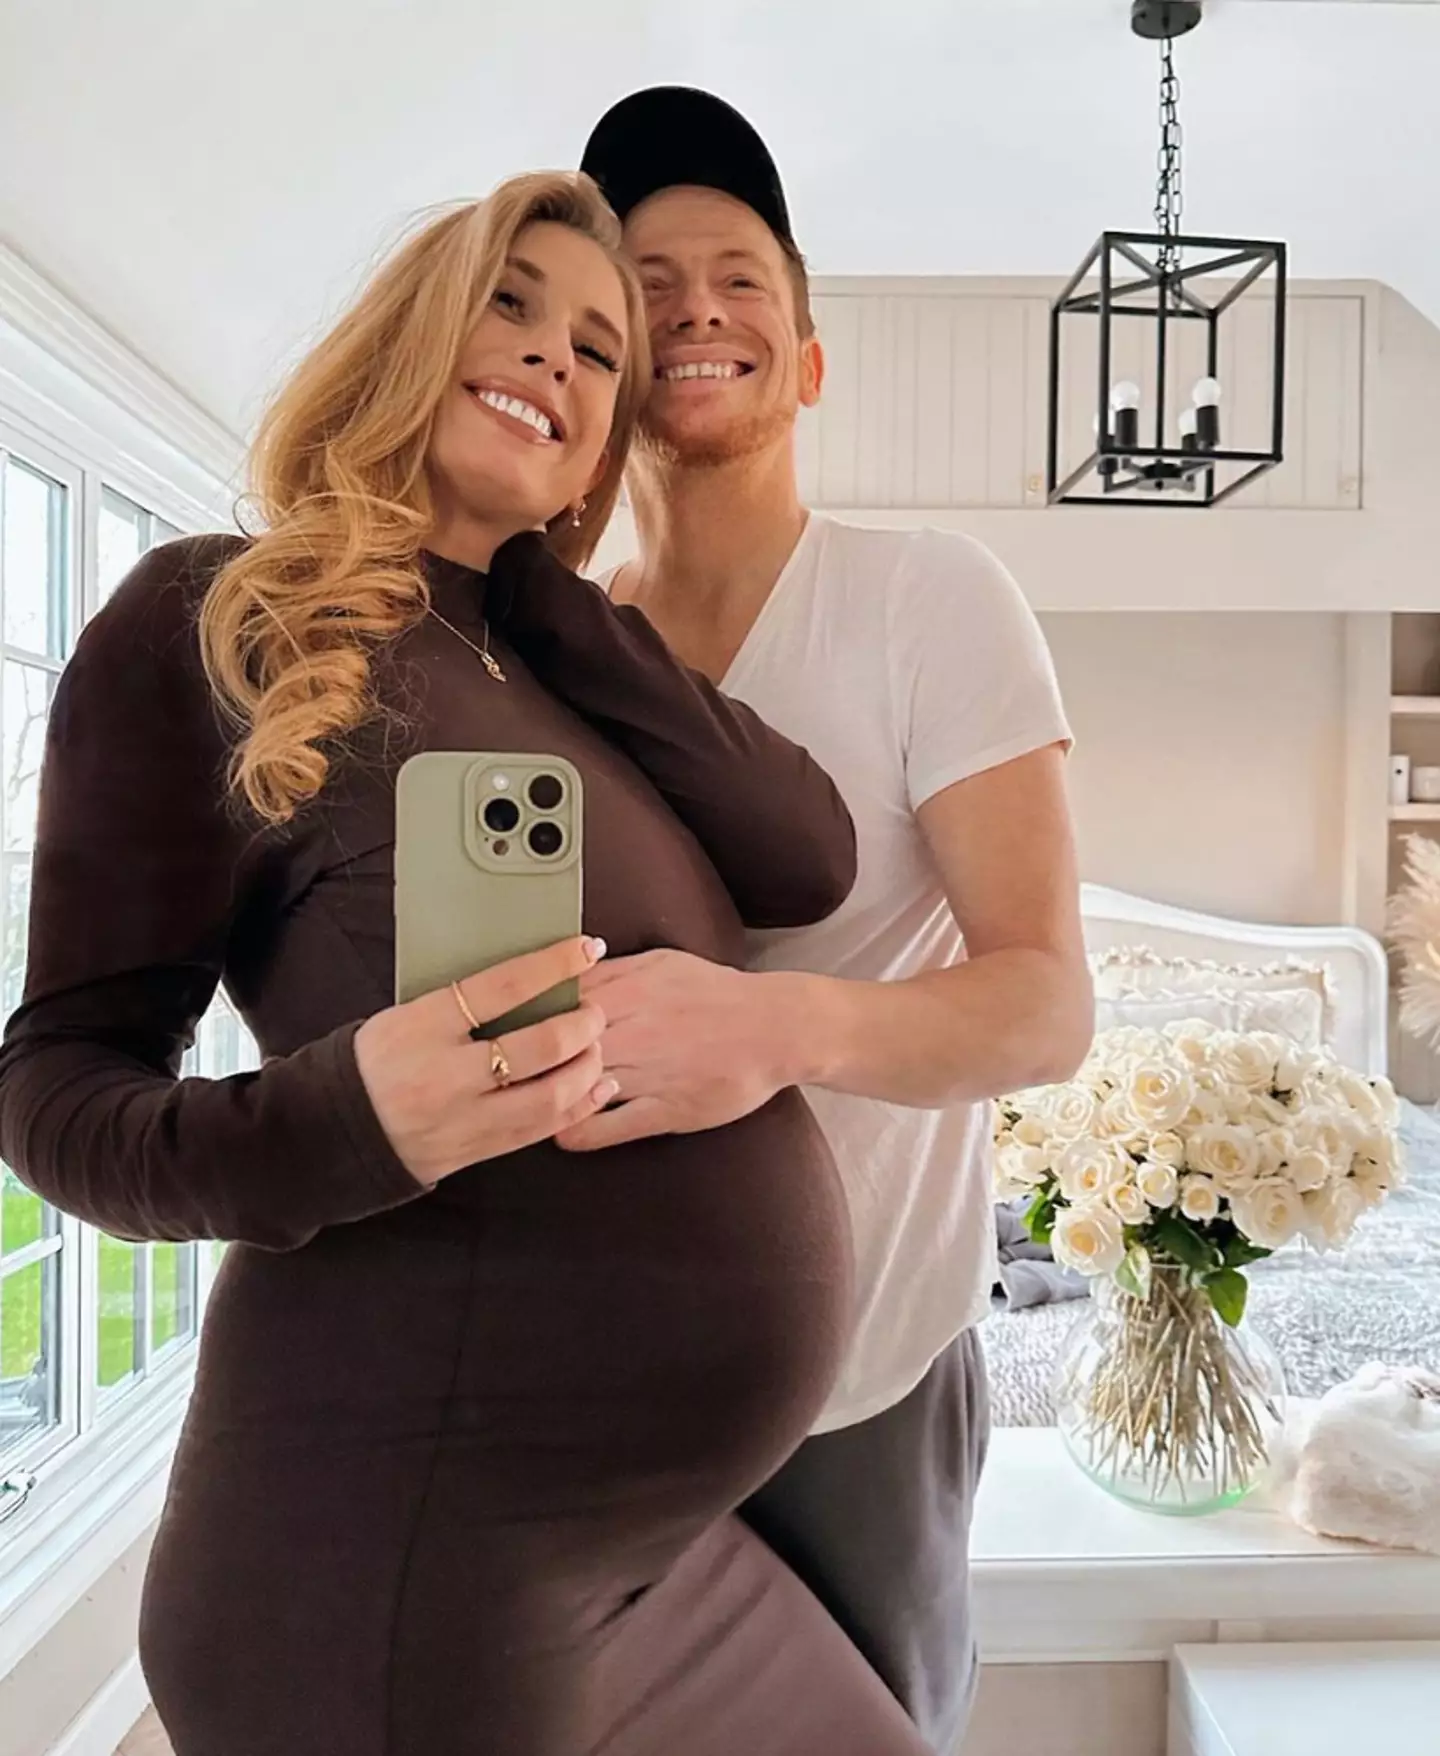 Stacey and Joe are expecting a baby girl.